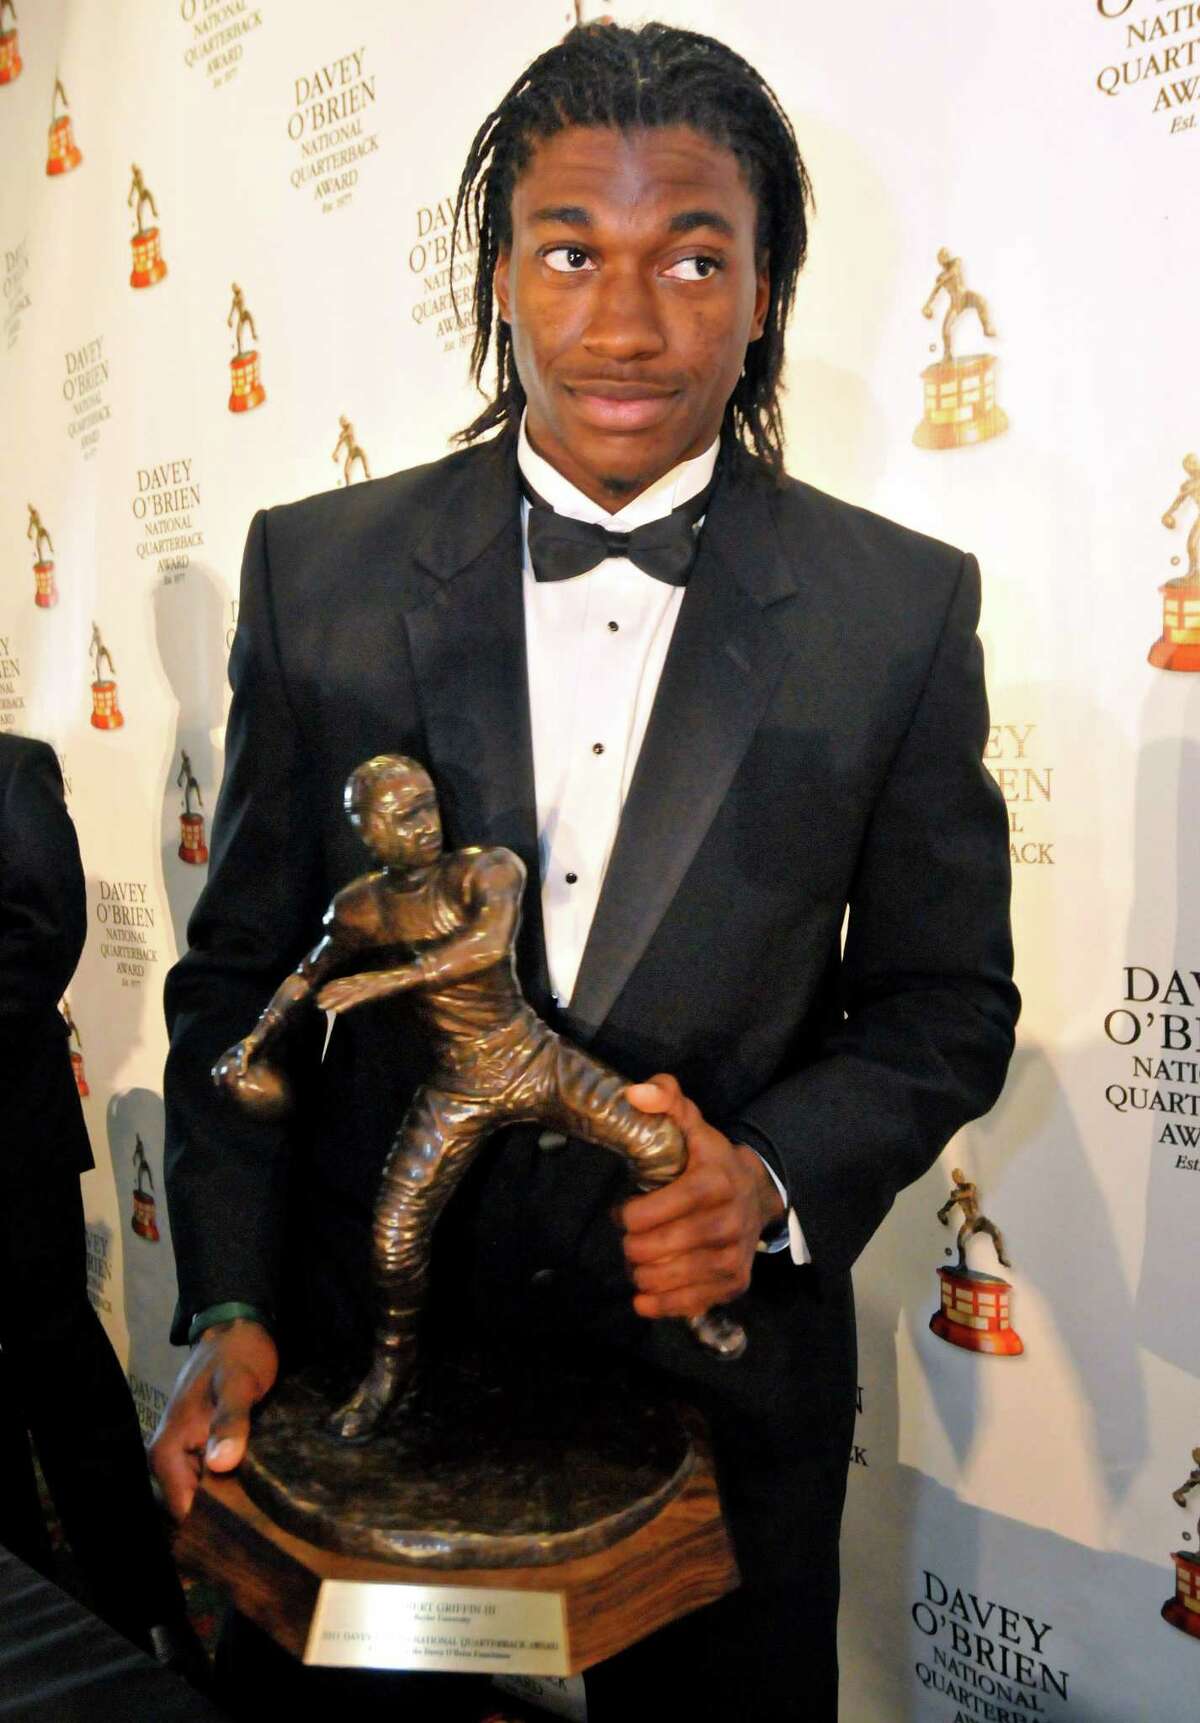 Former Baylor quarterback Robert Griffin III stands with the Davey O'Brien Award, given to the nation's top collegiate quarterback, during a news conference at the awards dinner in Fort Worth, Texas, Monday, Feb. 20, 2012. (AP Photo/Fort Worth Star-Telegram, Max Faulkner) MAGS OUT